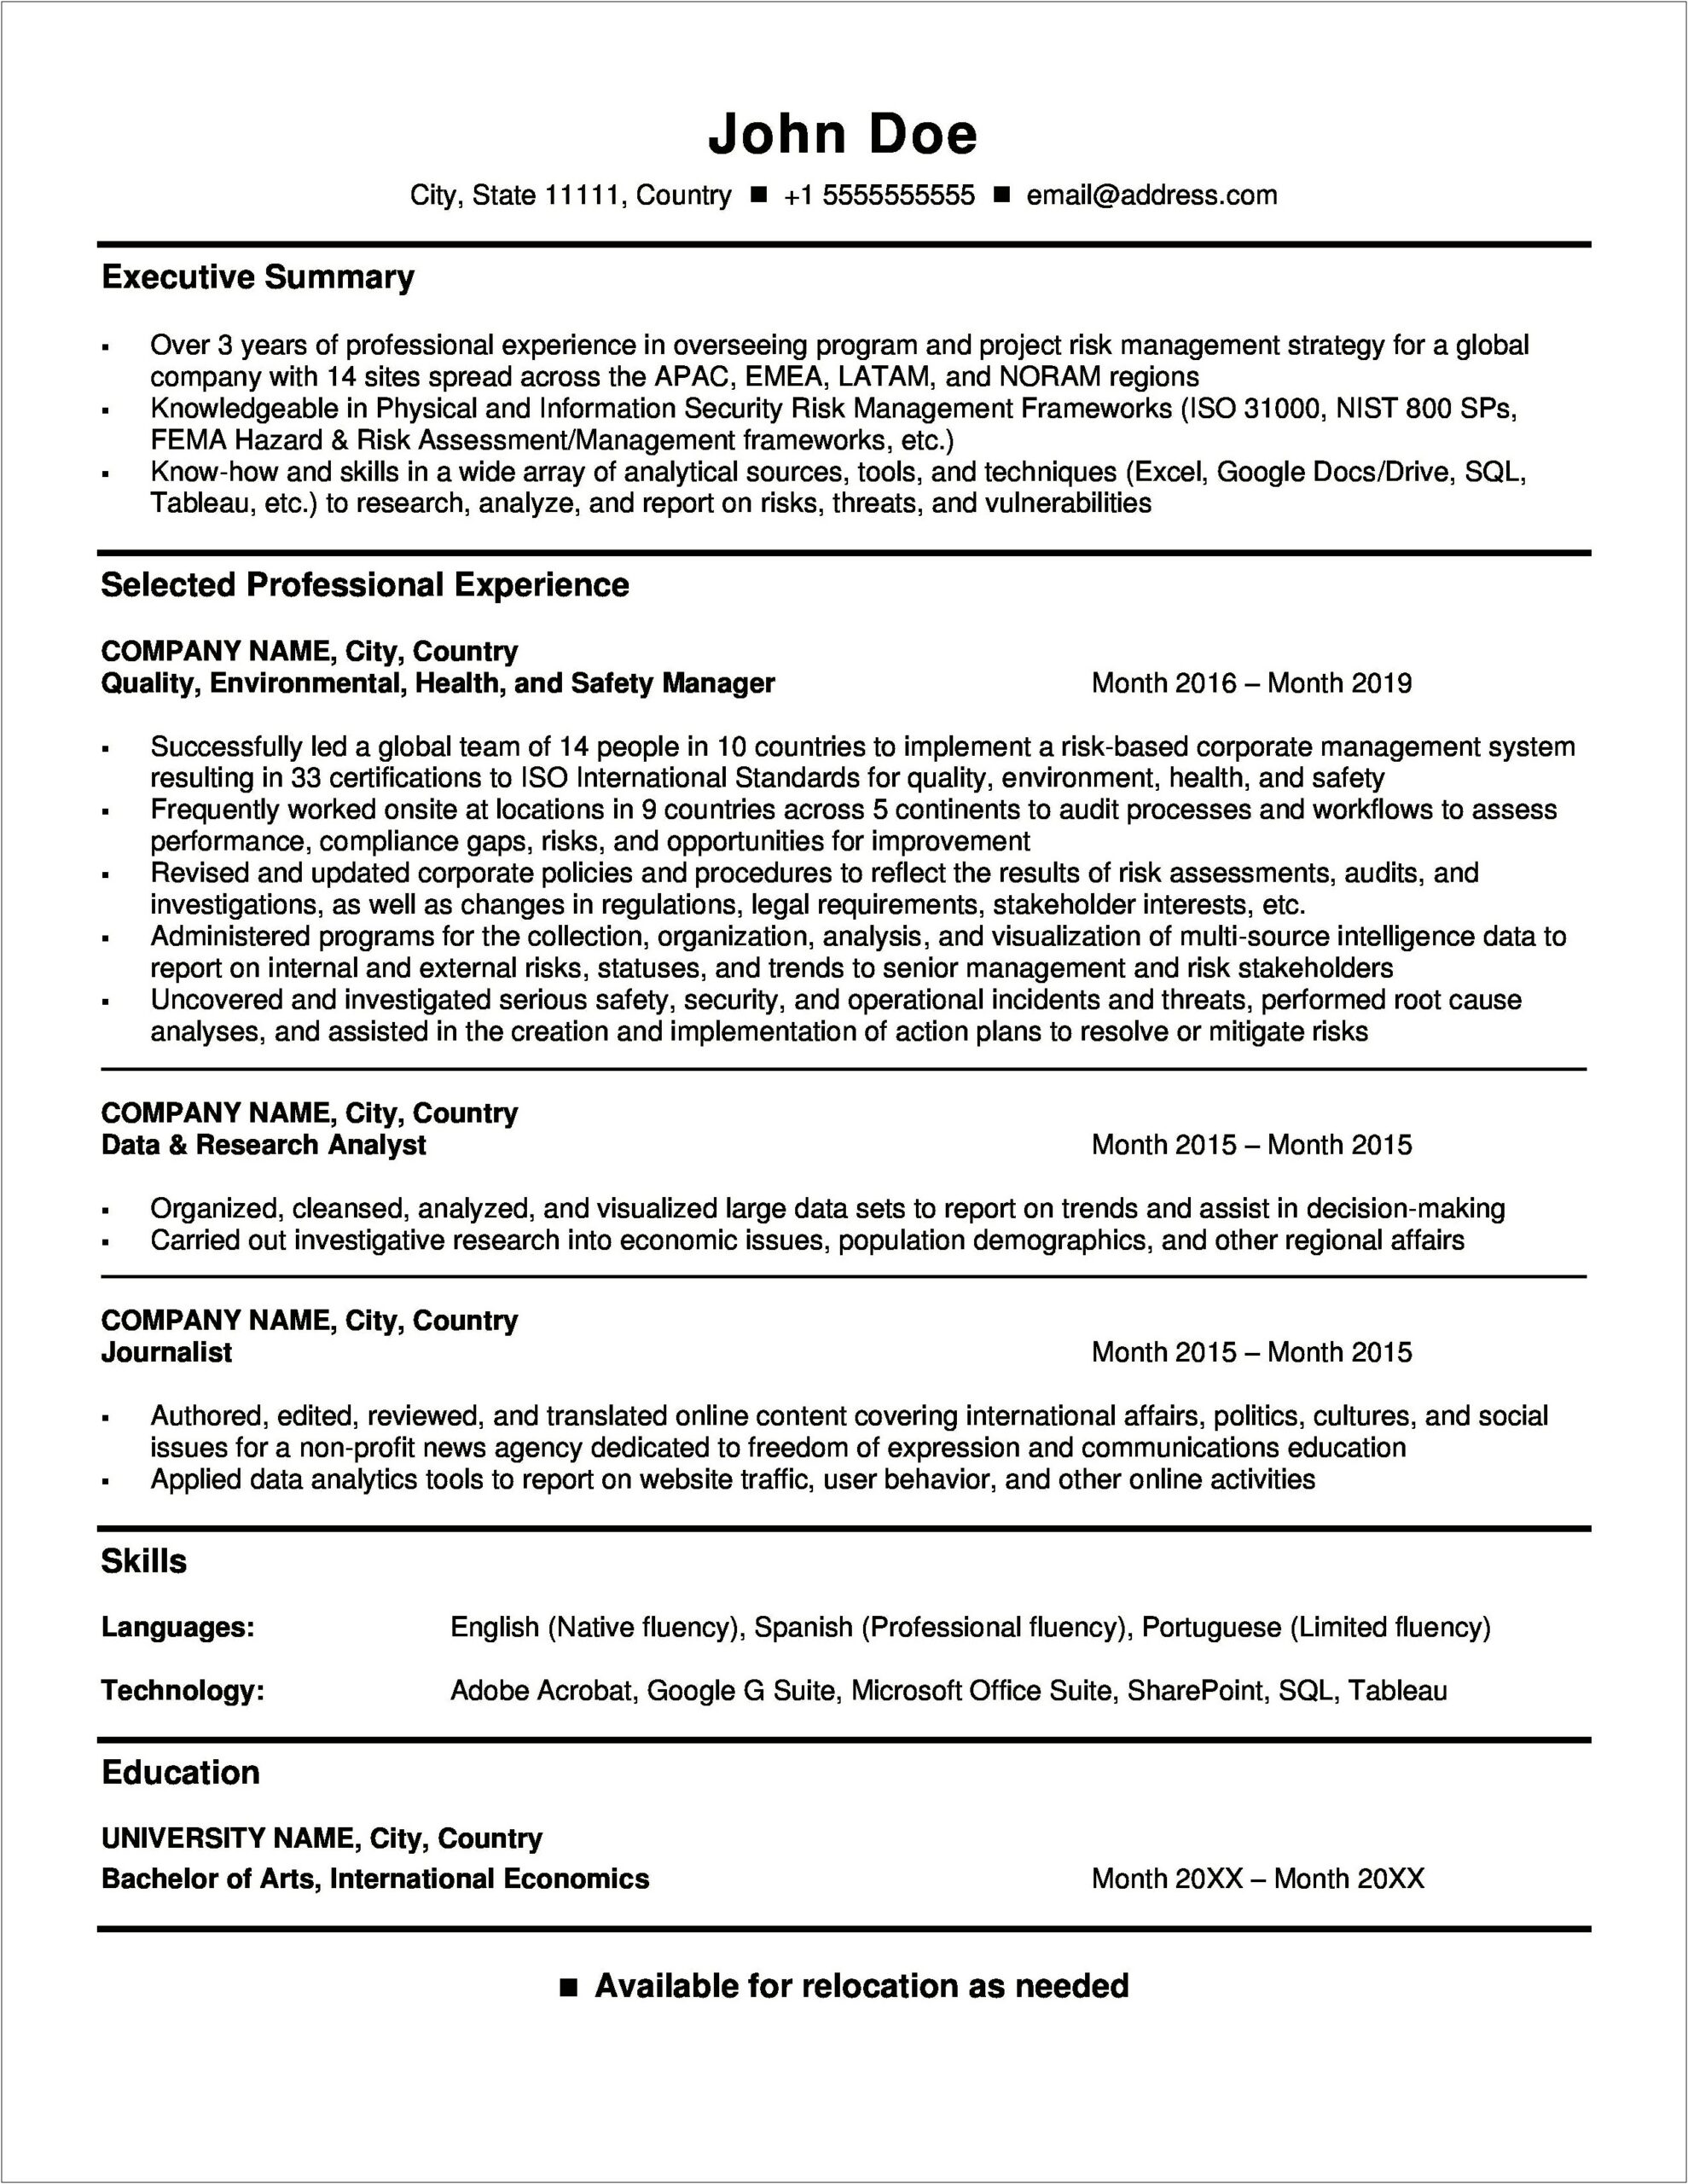 Sample Resumes With Employment Gaps From Travel